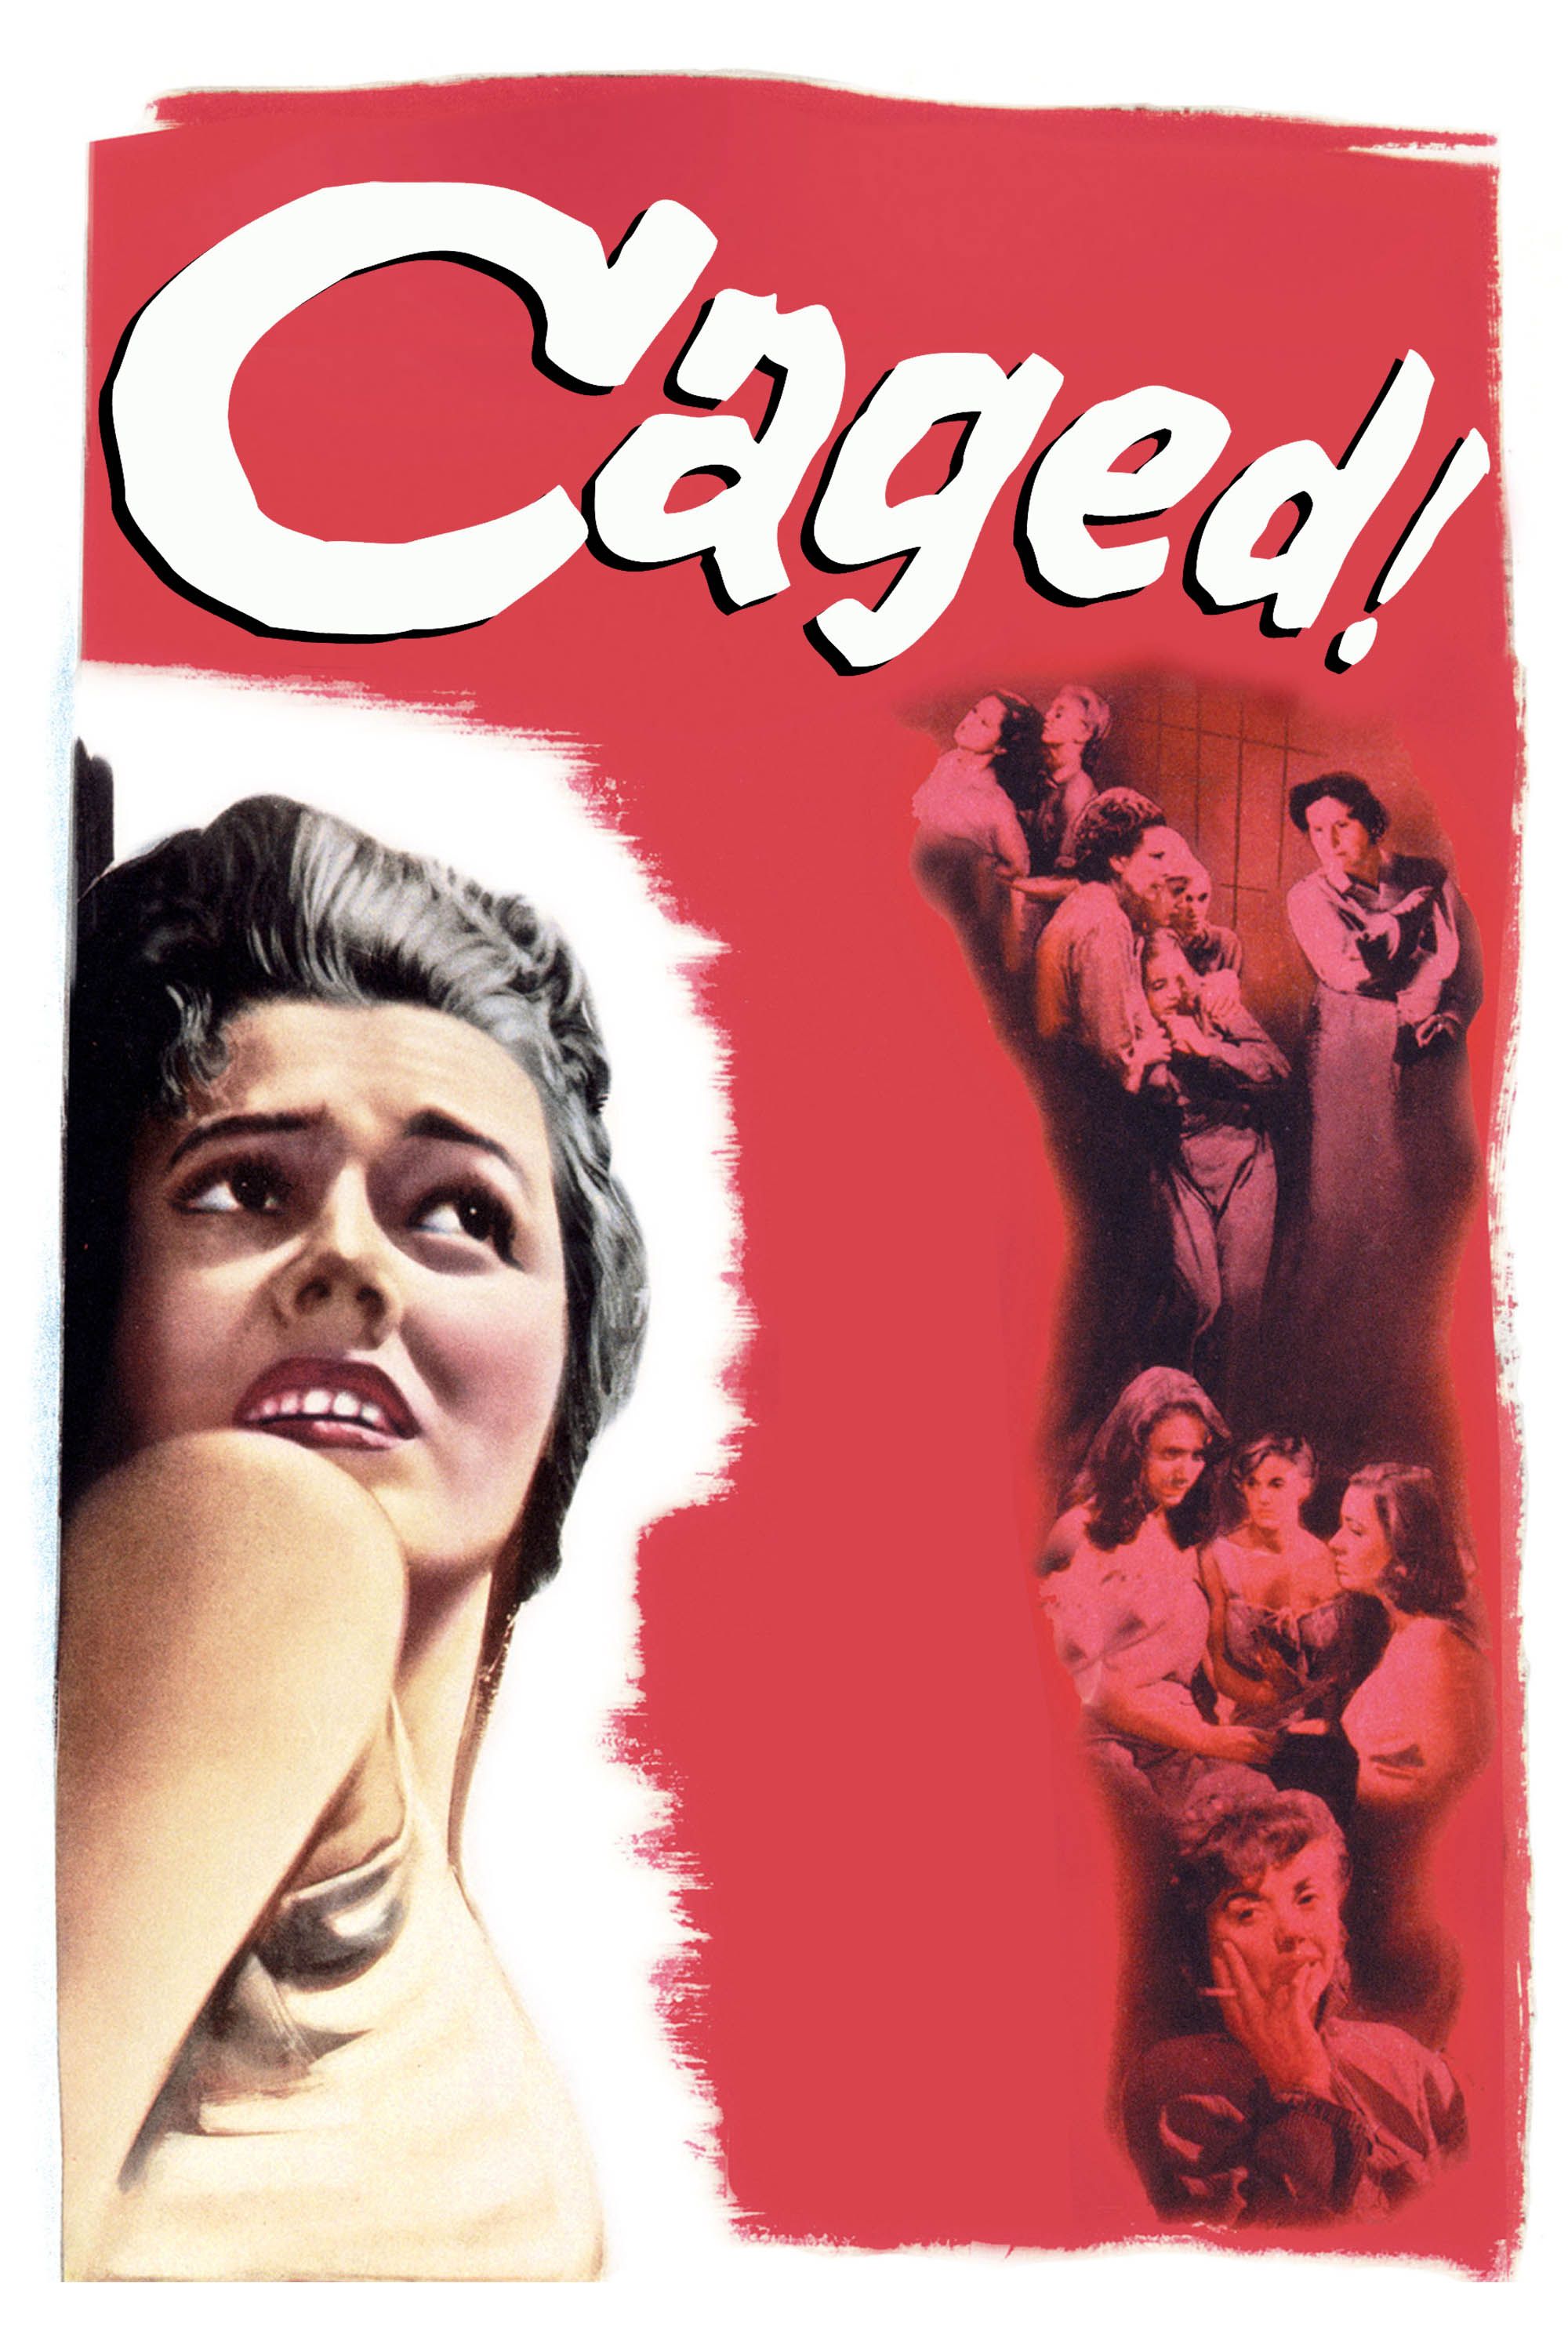 amy fox teem recommends Caged 2011 Full Movie